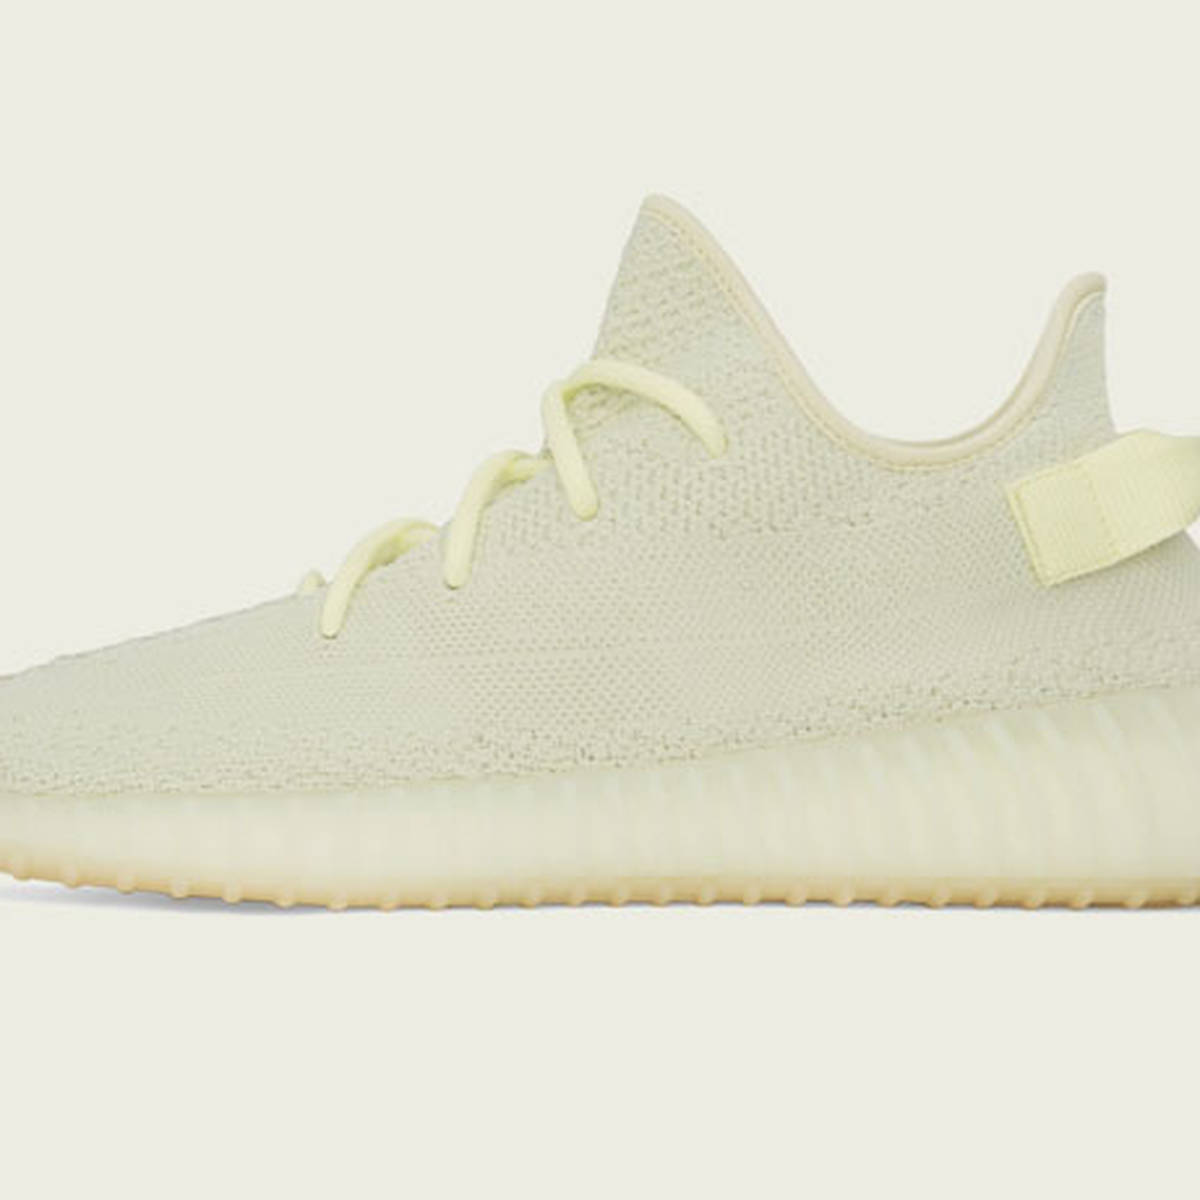 Yeezy Boost 350 V2 'Butter': What They Cost And Where To Buy Them